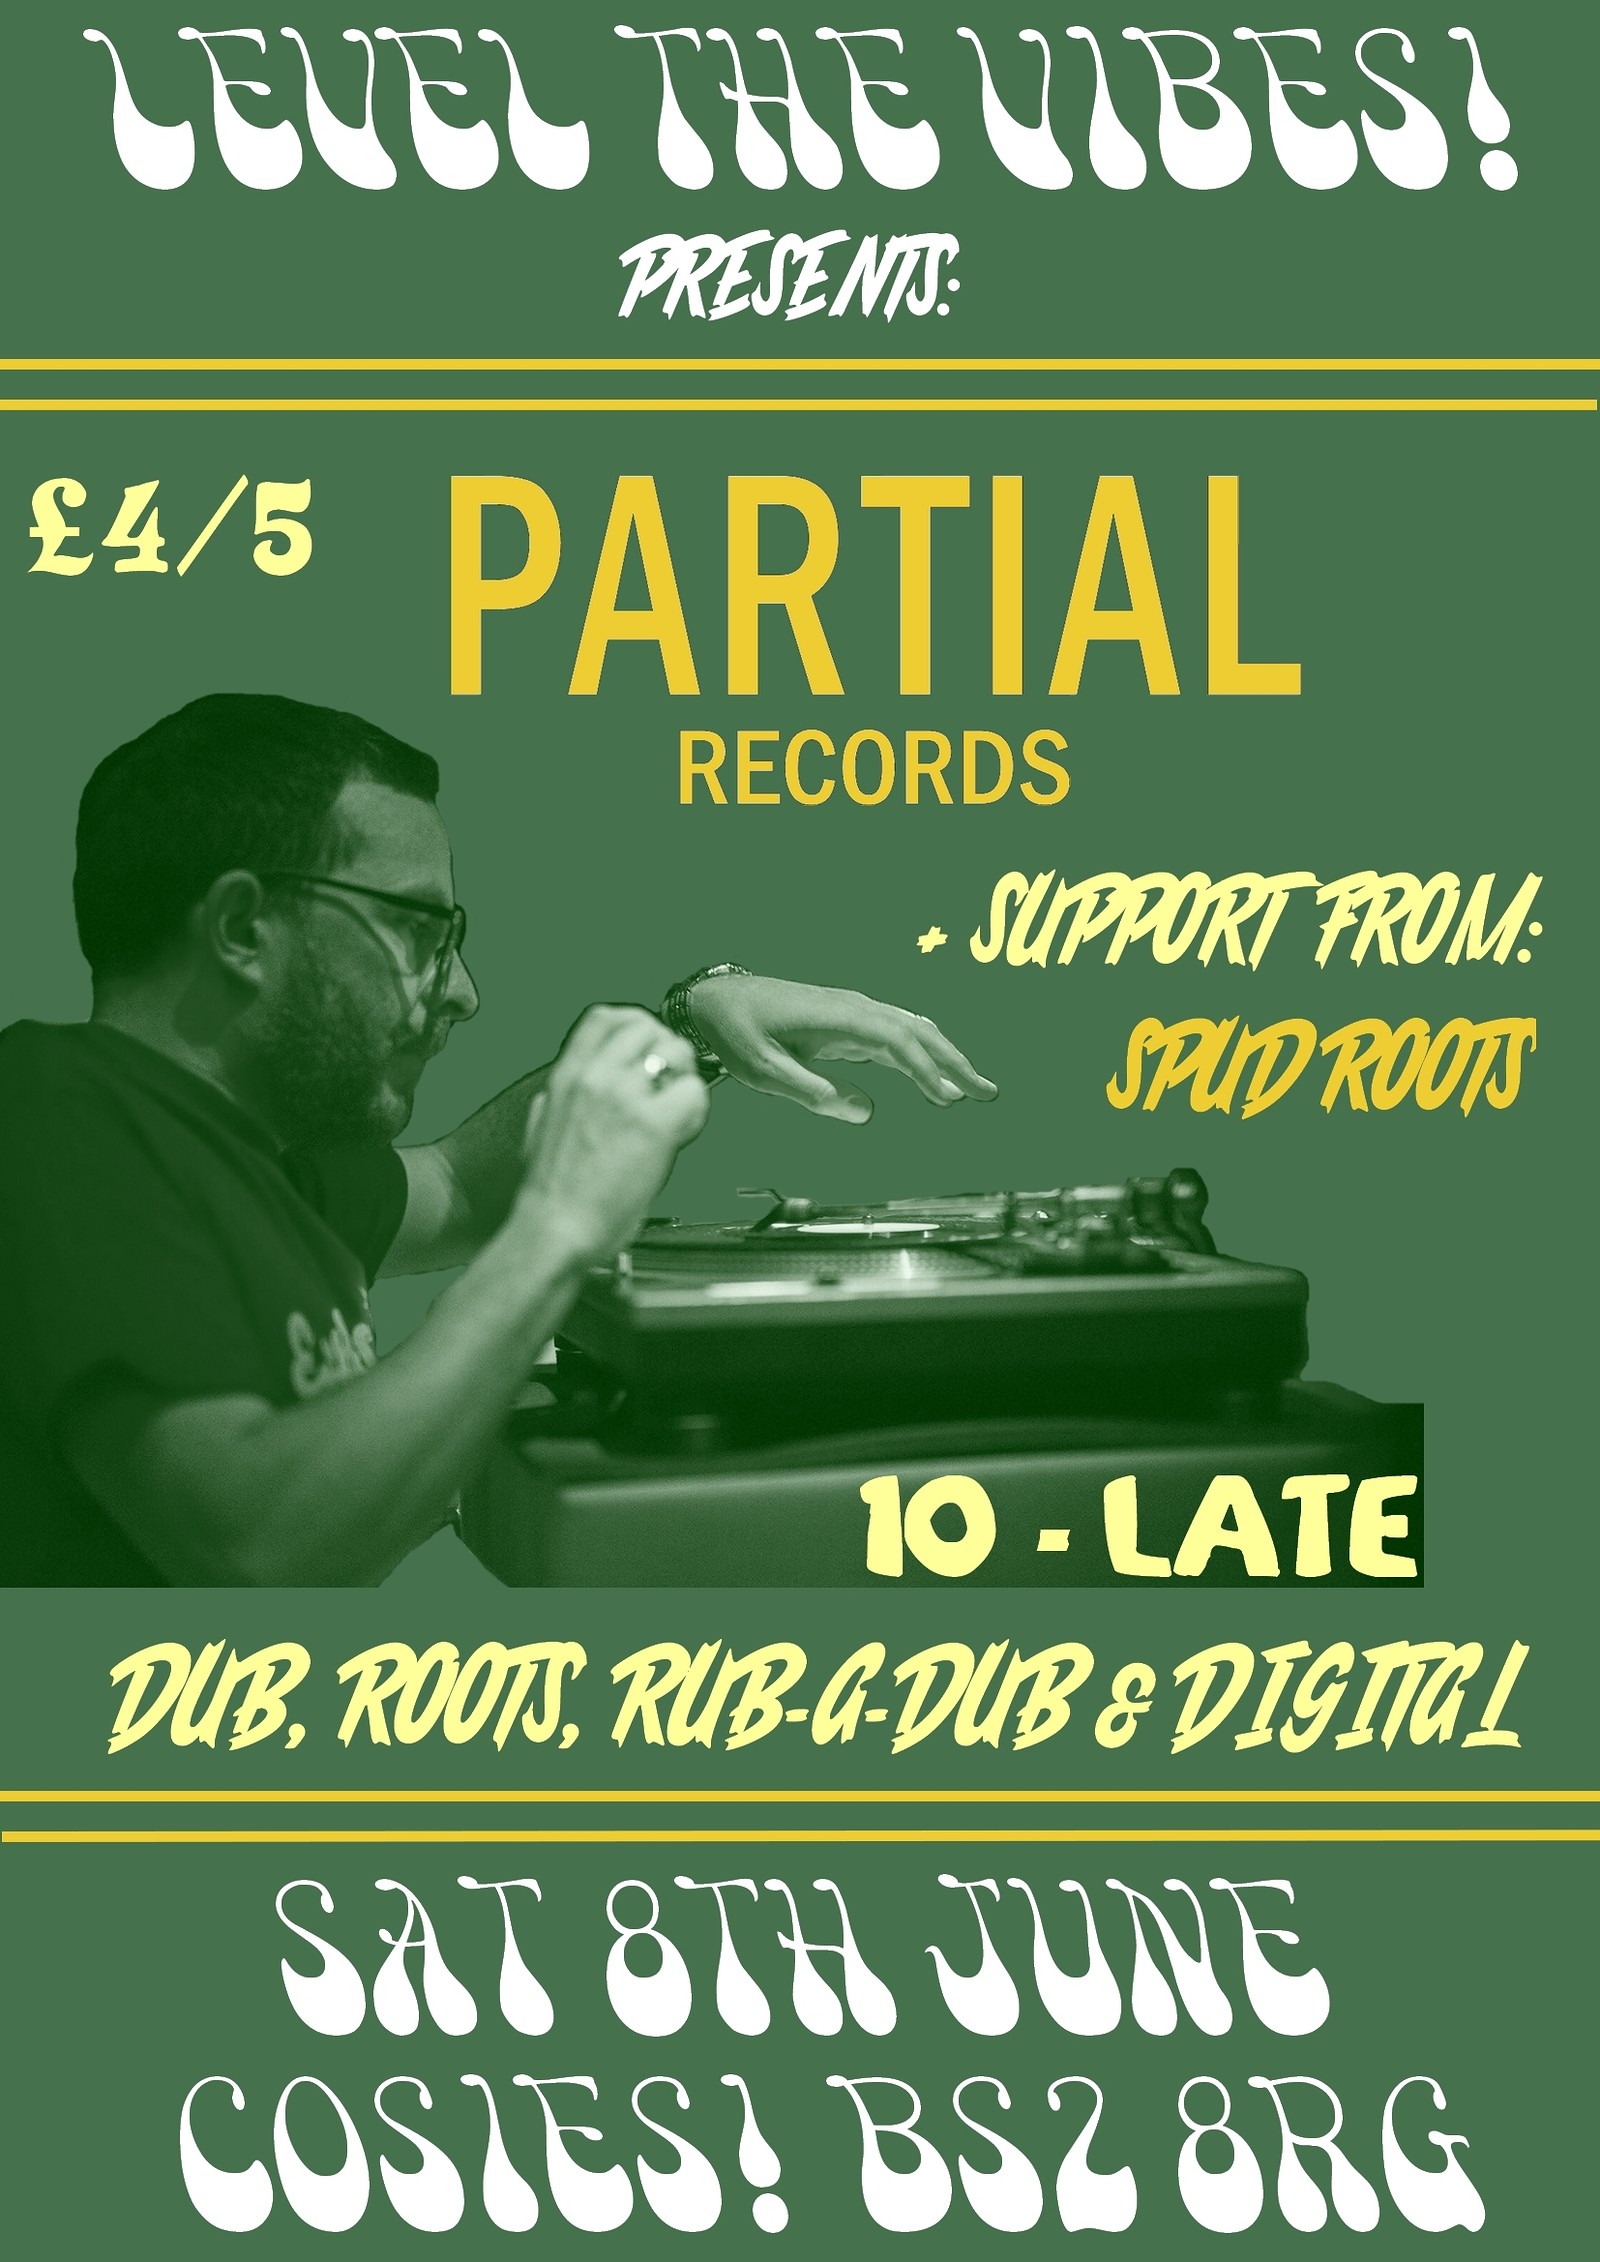 Level the Vibes Pres. Partial Records at Cosies